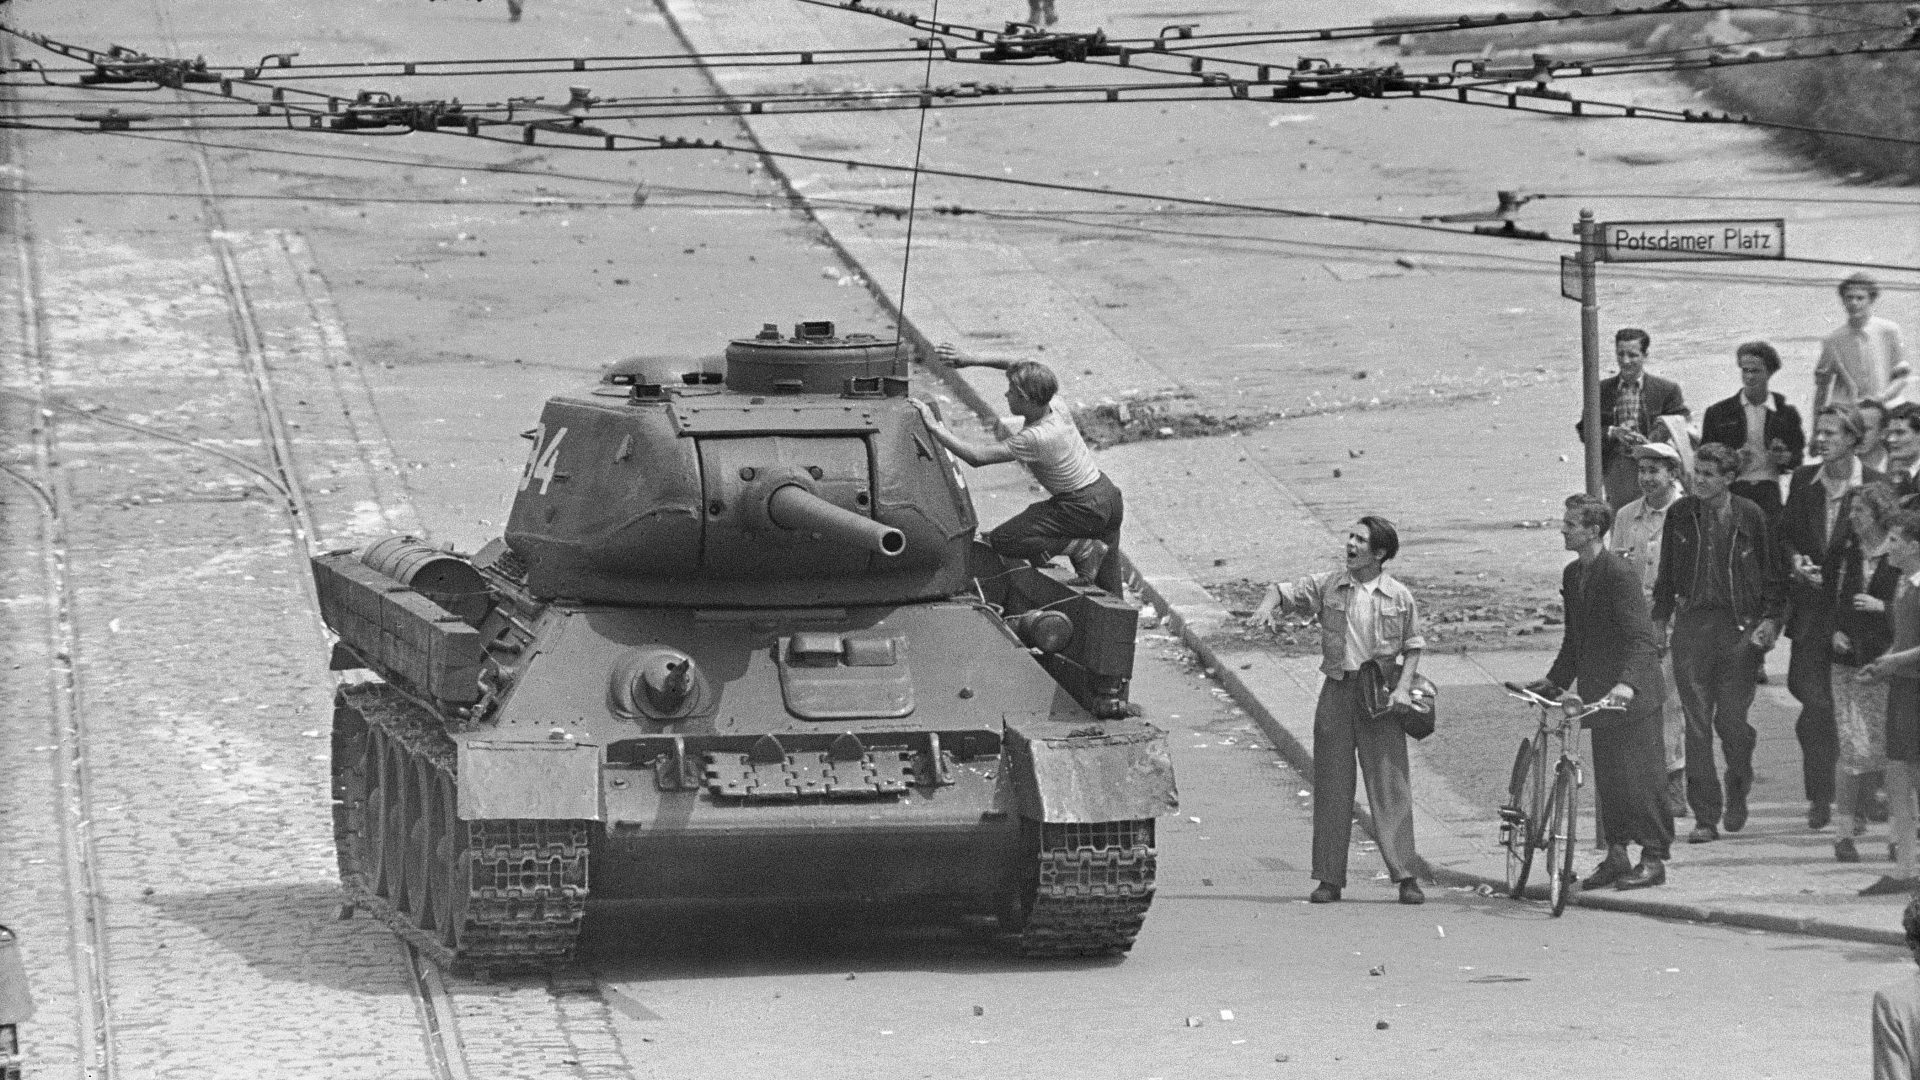 The sight of Soviet tanks in Berlin was a shock to the demonstrators demanding changes to production quotas. Photo: Bettmann/ Getty